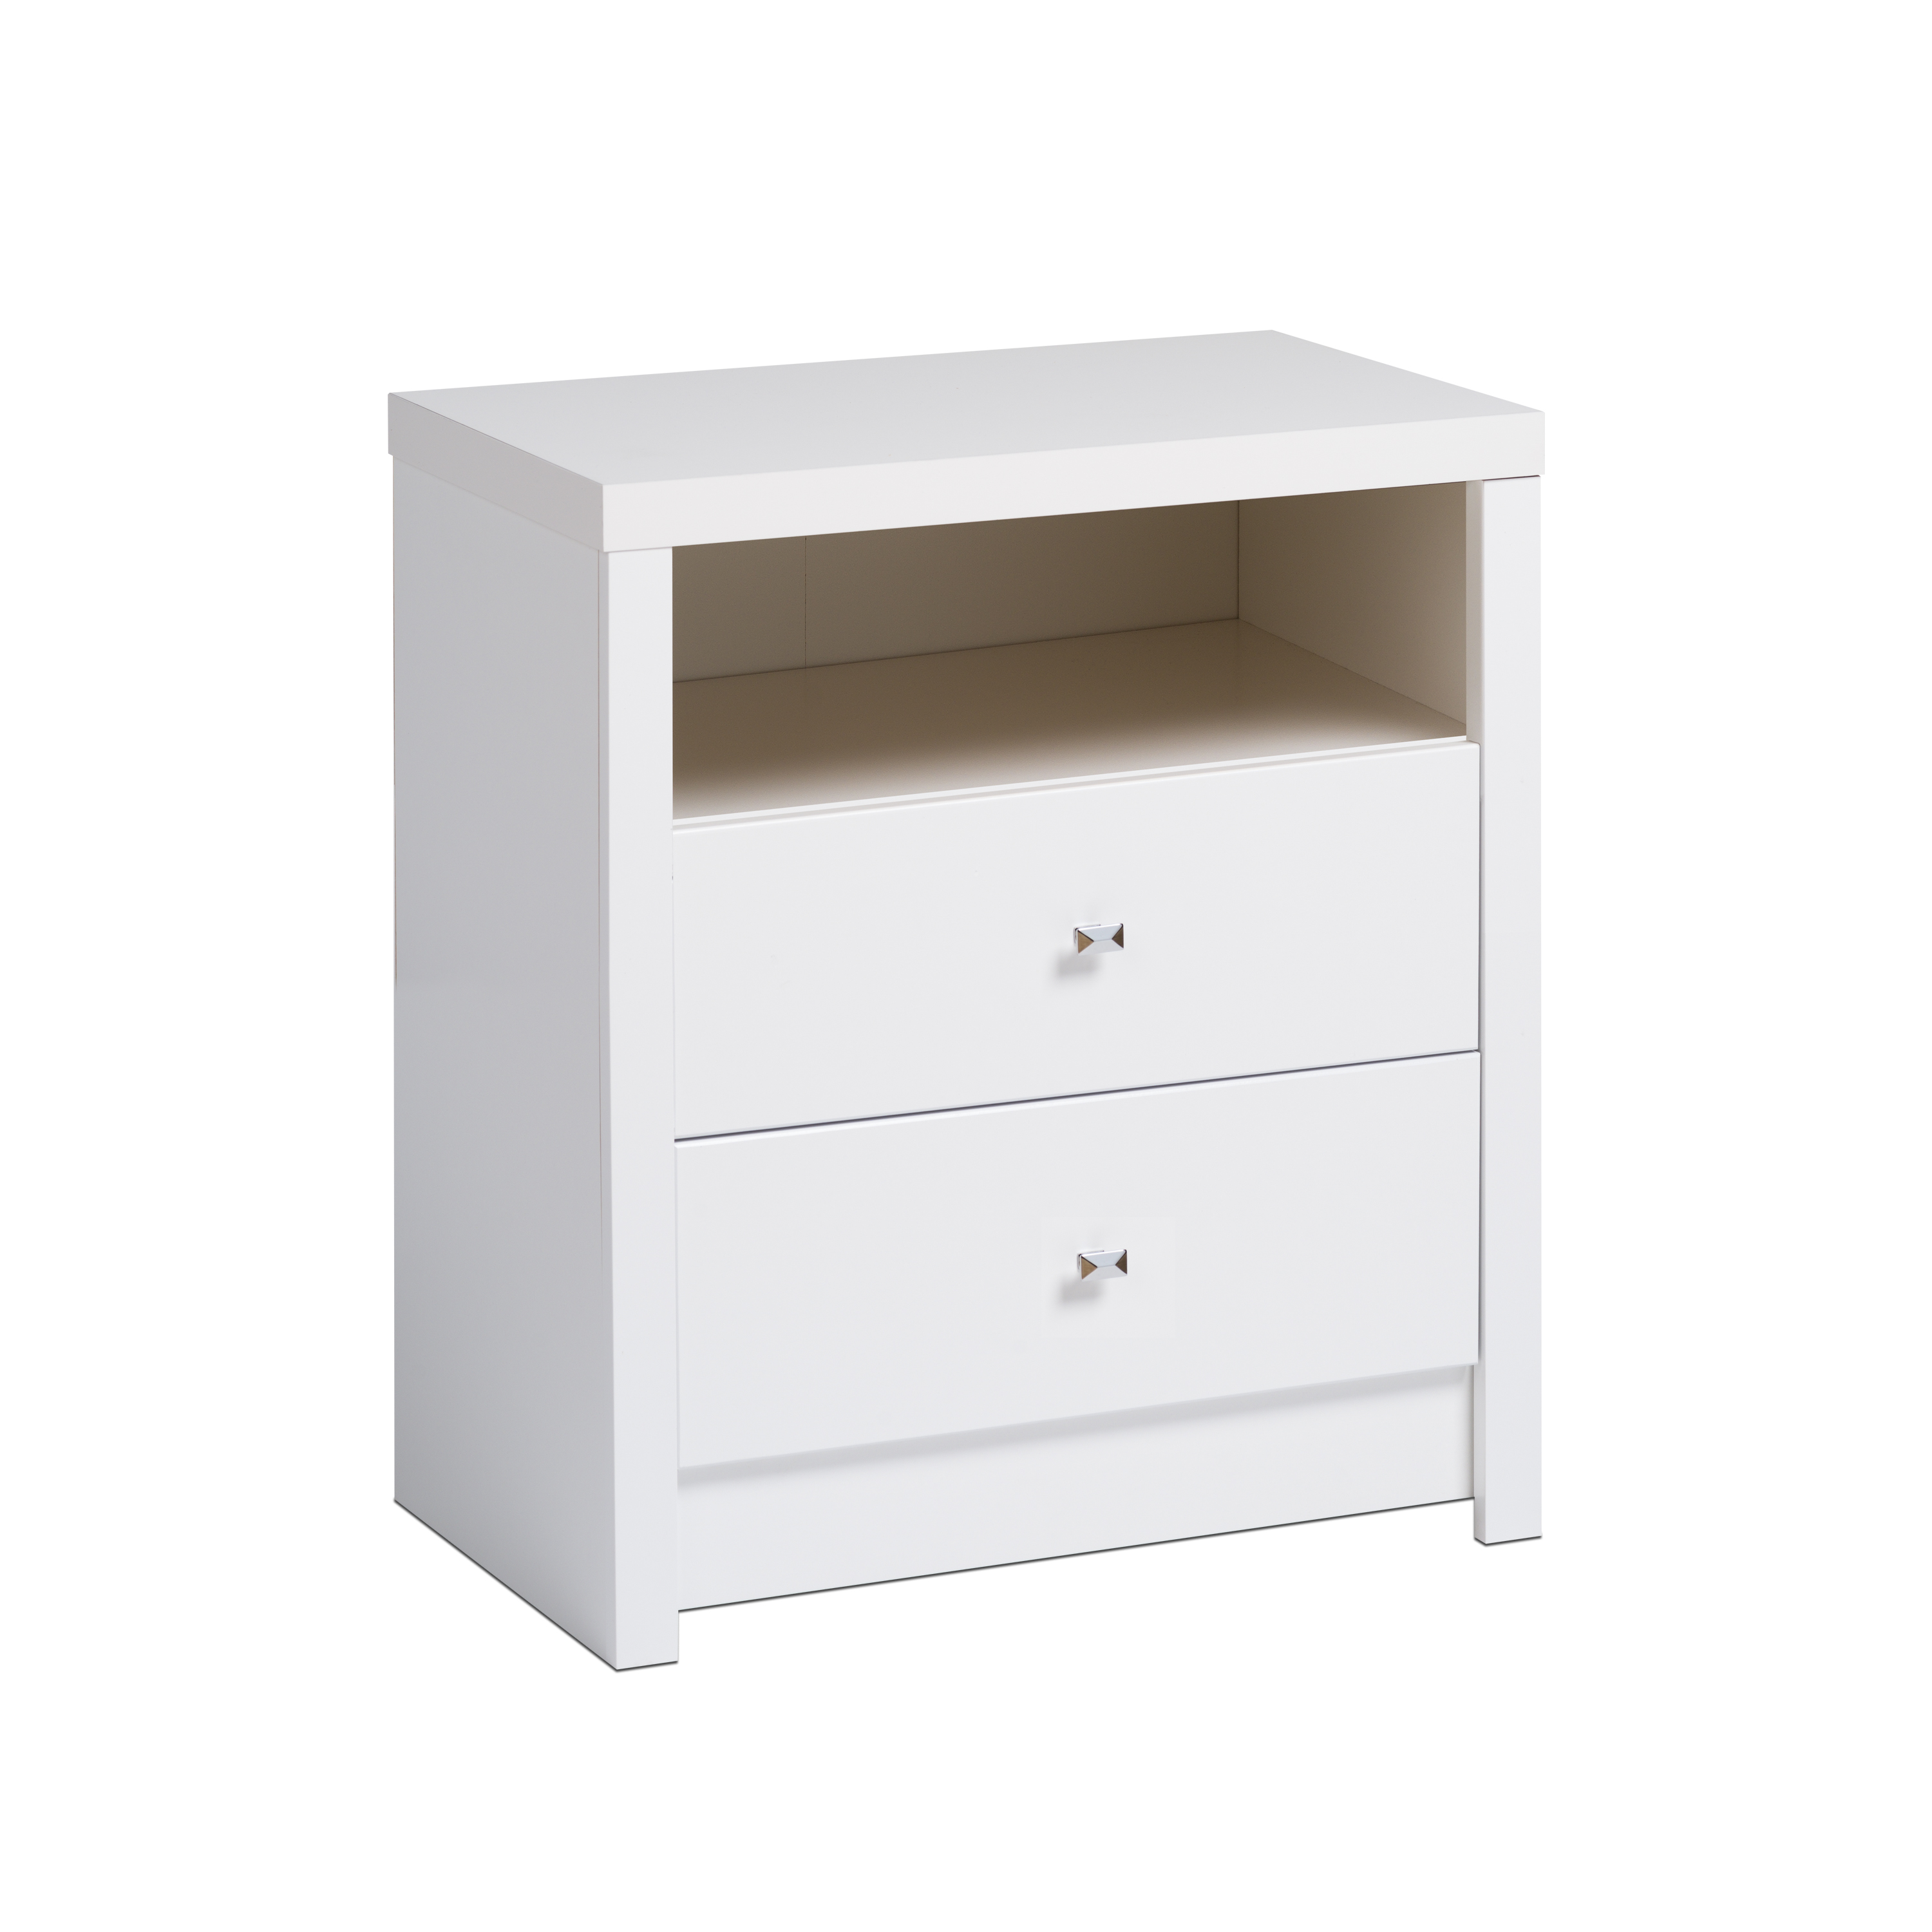 drawer wood composite tall nightstand end table white open shelf prepac accent furniture threshold windham collection wall dining room round tablecloth lucite bar height west elm